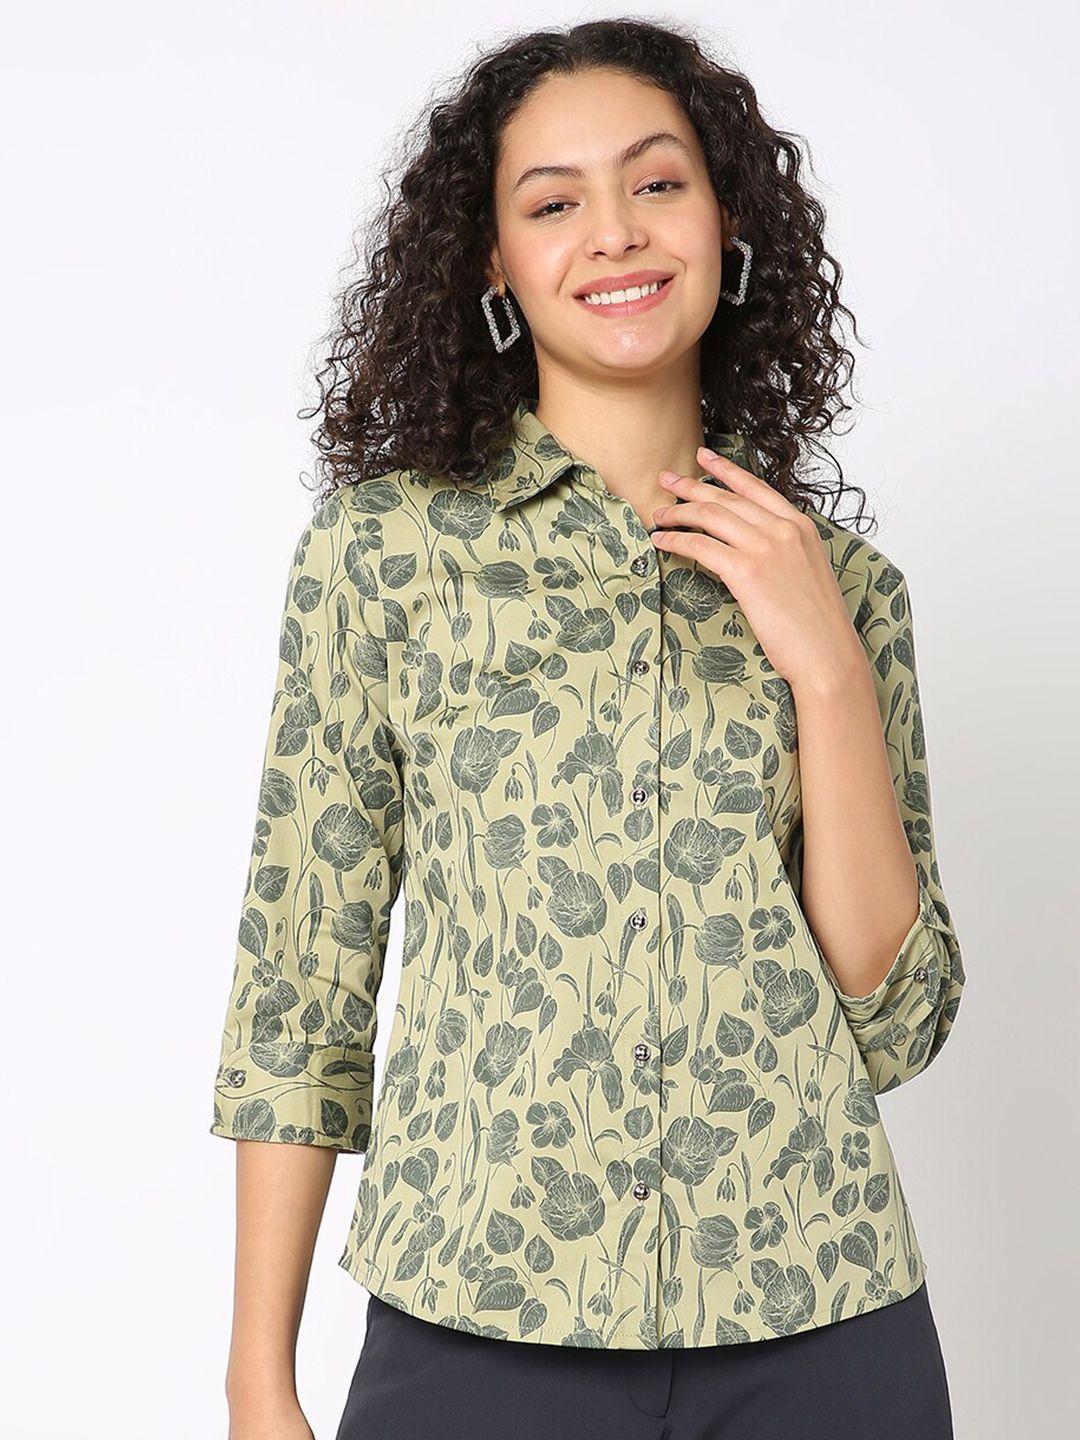 NOT SO PINK Floral Printed Relaxed Cotton Casual Shirt